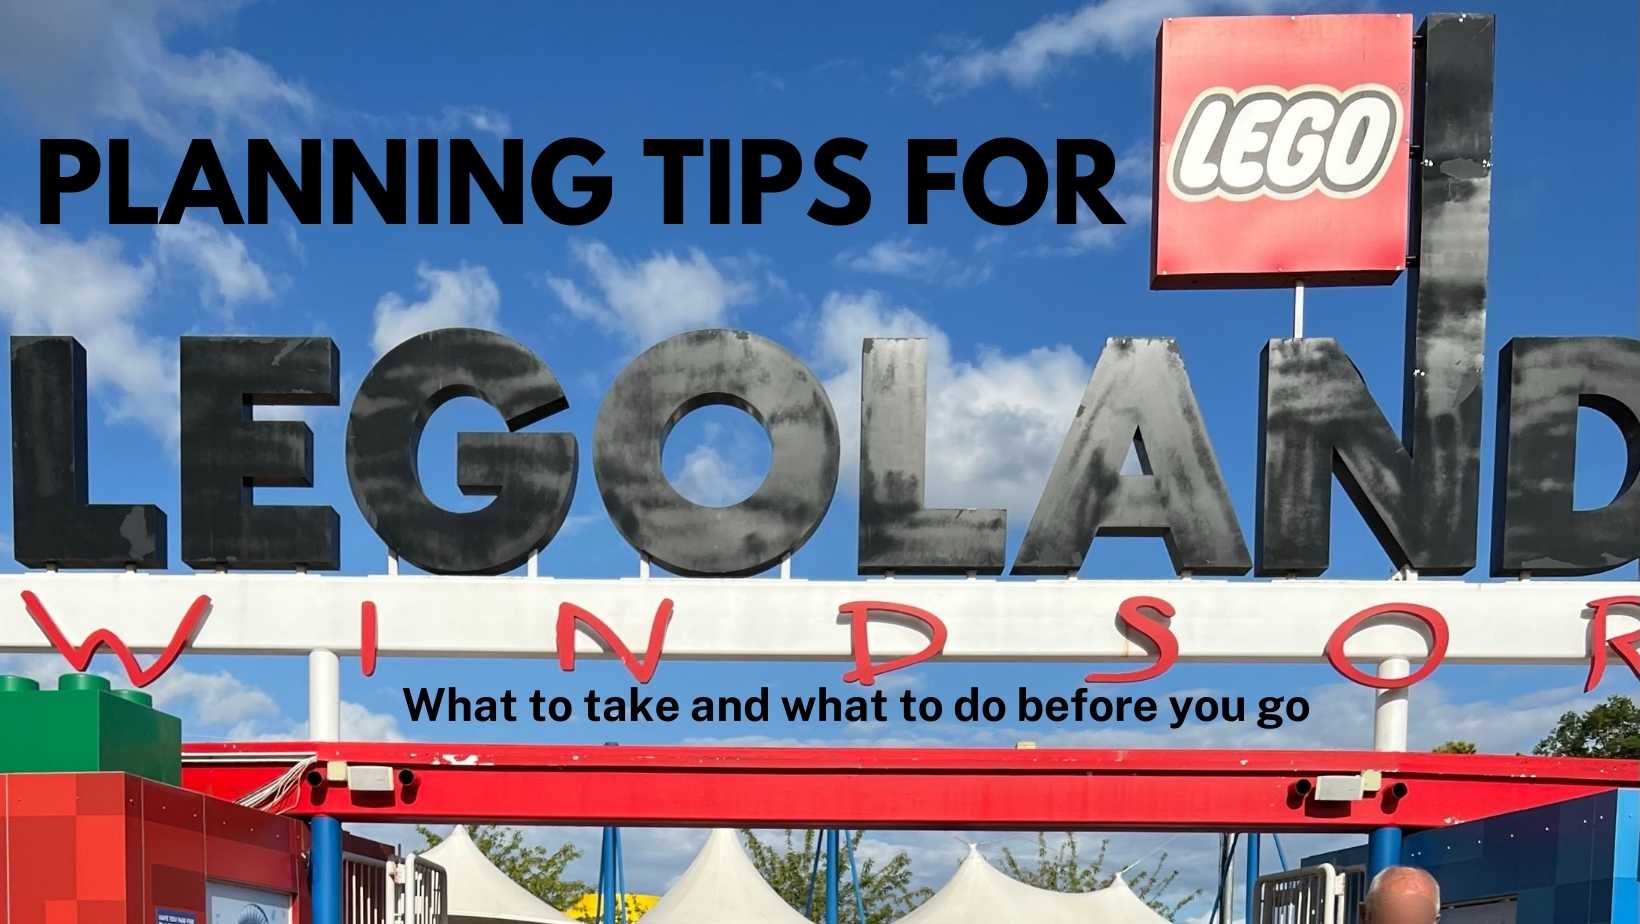 Planning Tips for LEGOLAND Windsor and what to take